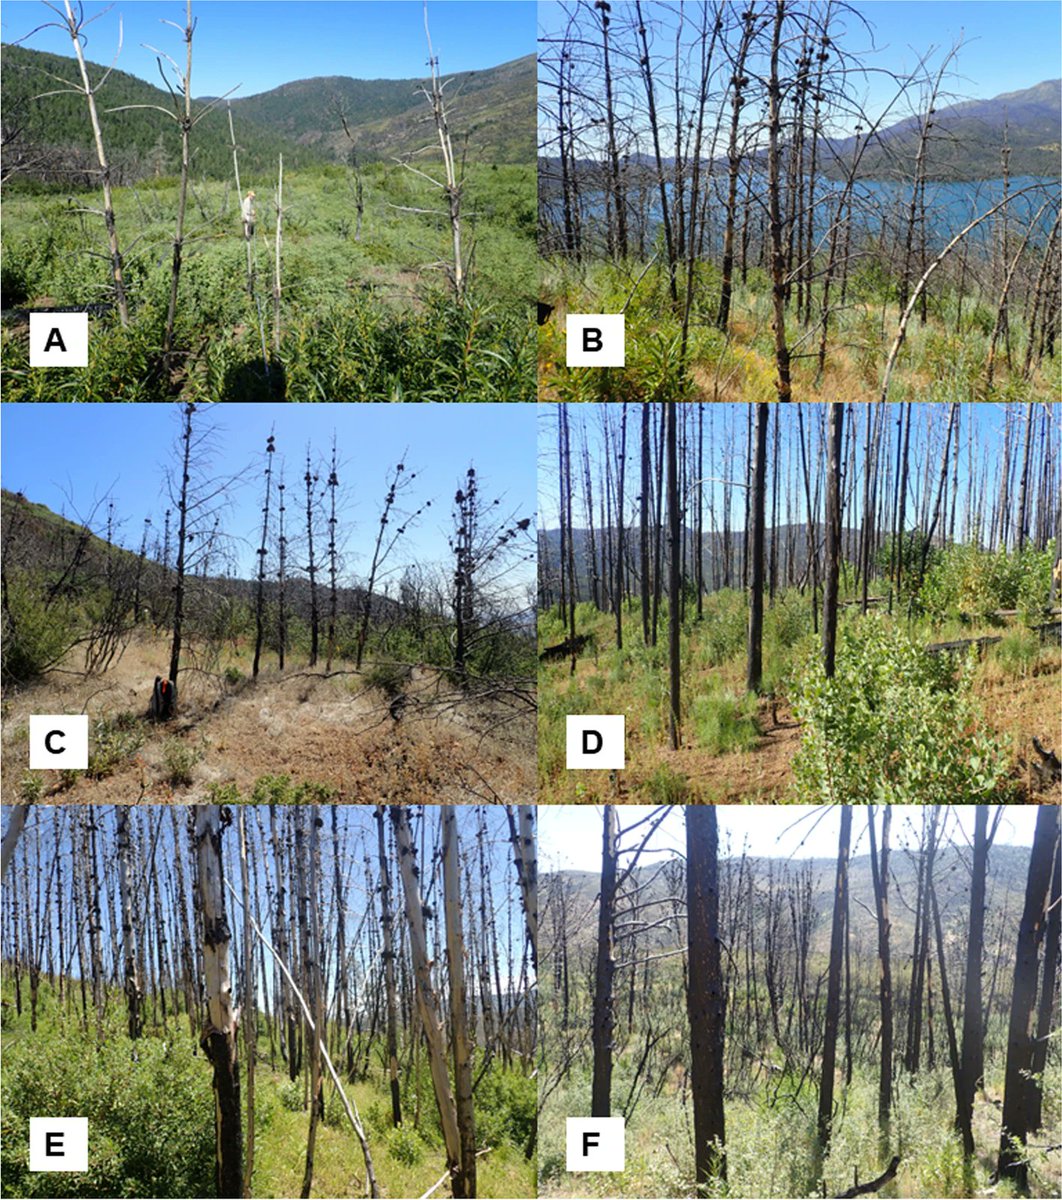 New in @fireecology!🌲🔥 Post-fire tree regeneration decreases sharply w/ short intervals btwn fires for #serotinous #knobcone pine. 2 orders of magnitude between 30+ yr vs 6 yr intervals fireecology.springeropen.com/articles/10.11… Led by @michelle_agne w/ @joe__fontaine +N. Enright #HarveyLab 1/3